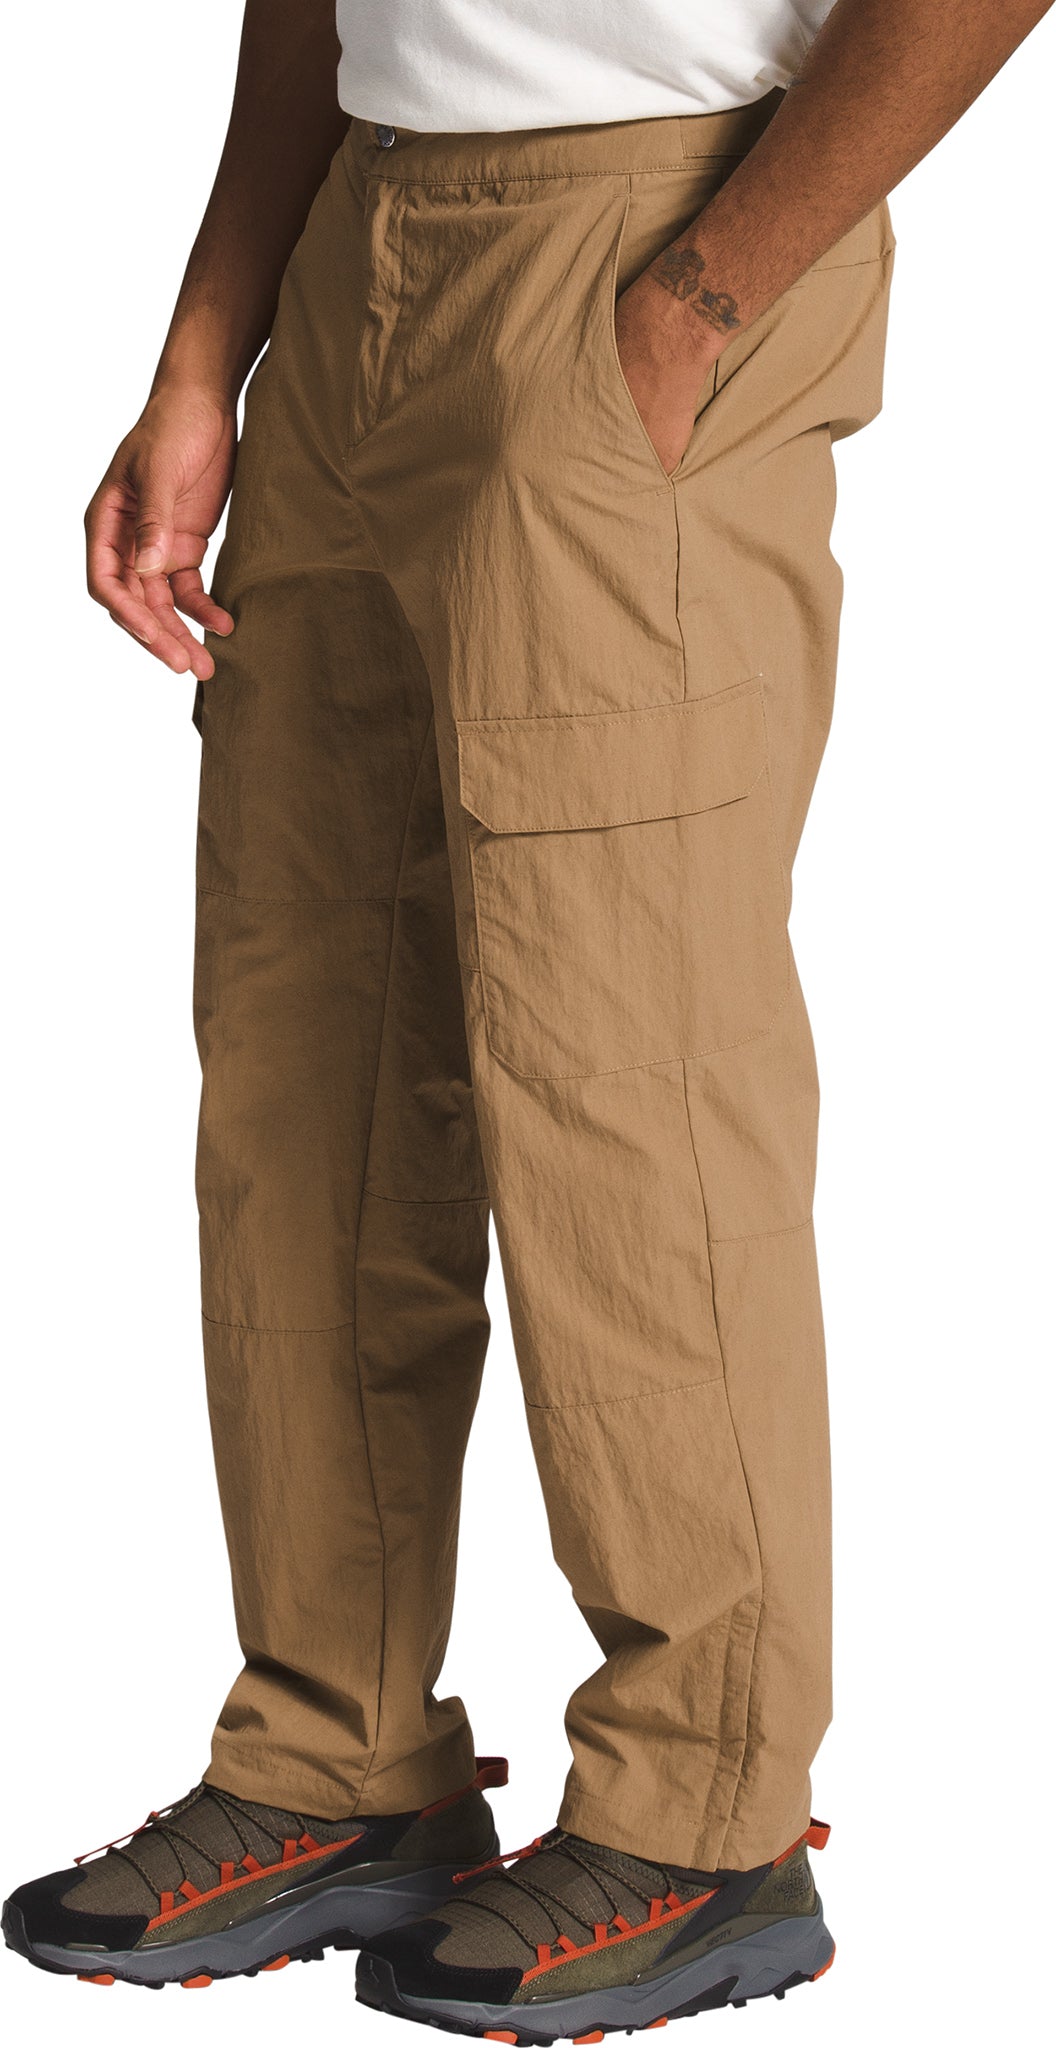 Ripstop cargo pant, The North Face, Training Bottoms